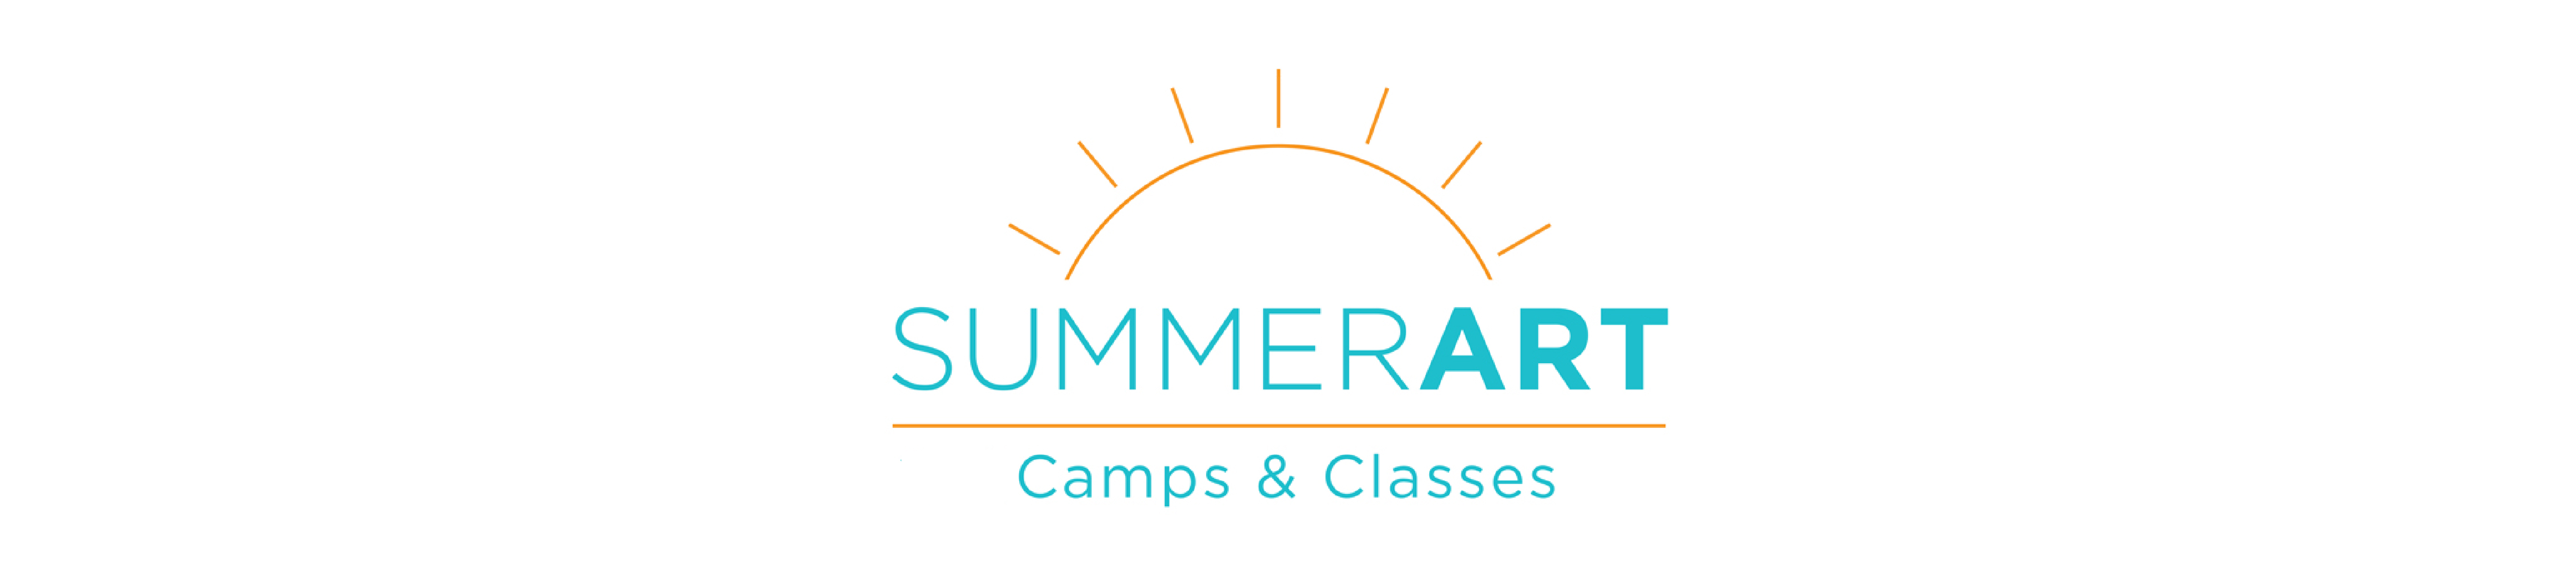 I'm an image! A white, wide rectangle with the SummerART online 2020 logo in the center. The Logo says summerART camps and classes and has a sun outline above it.